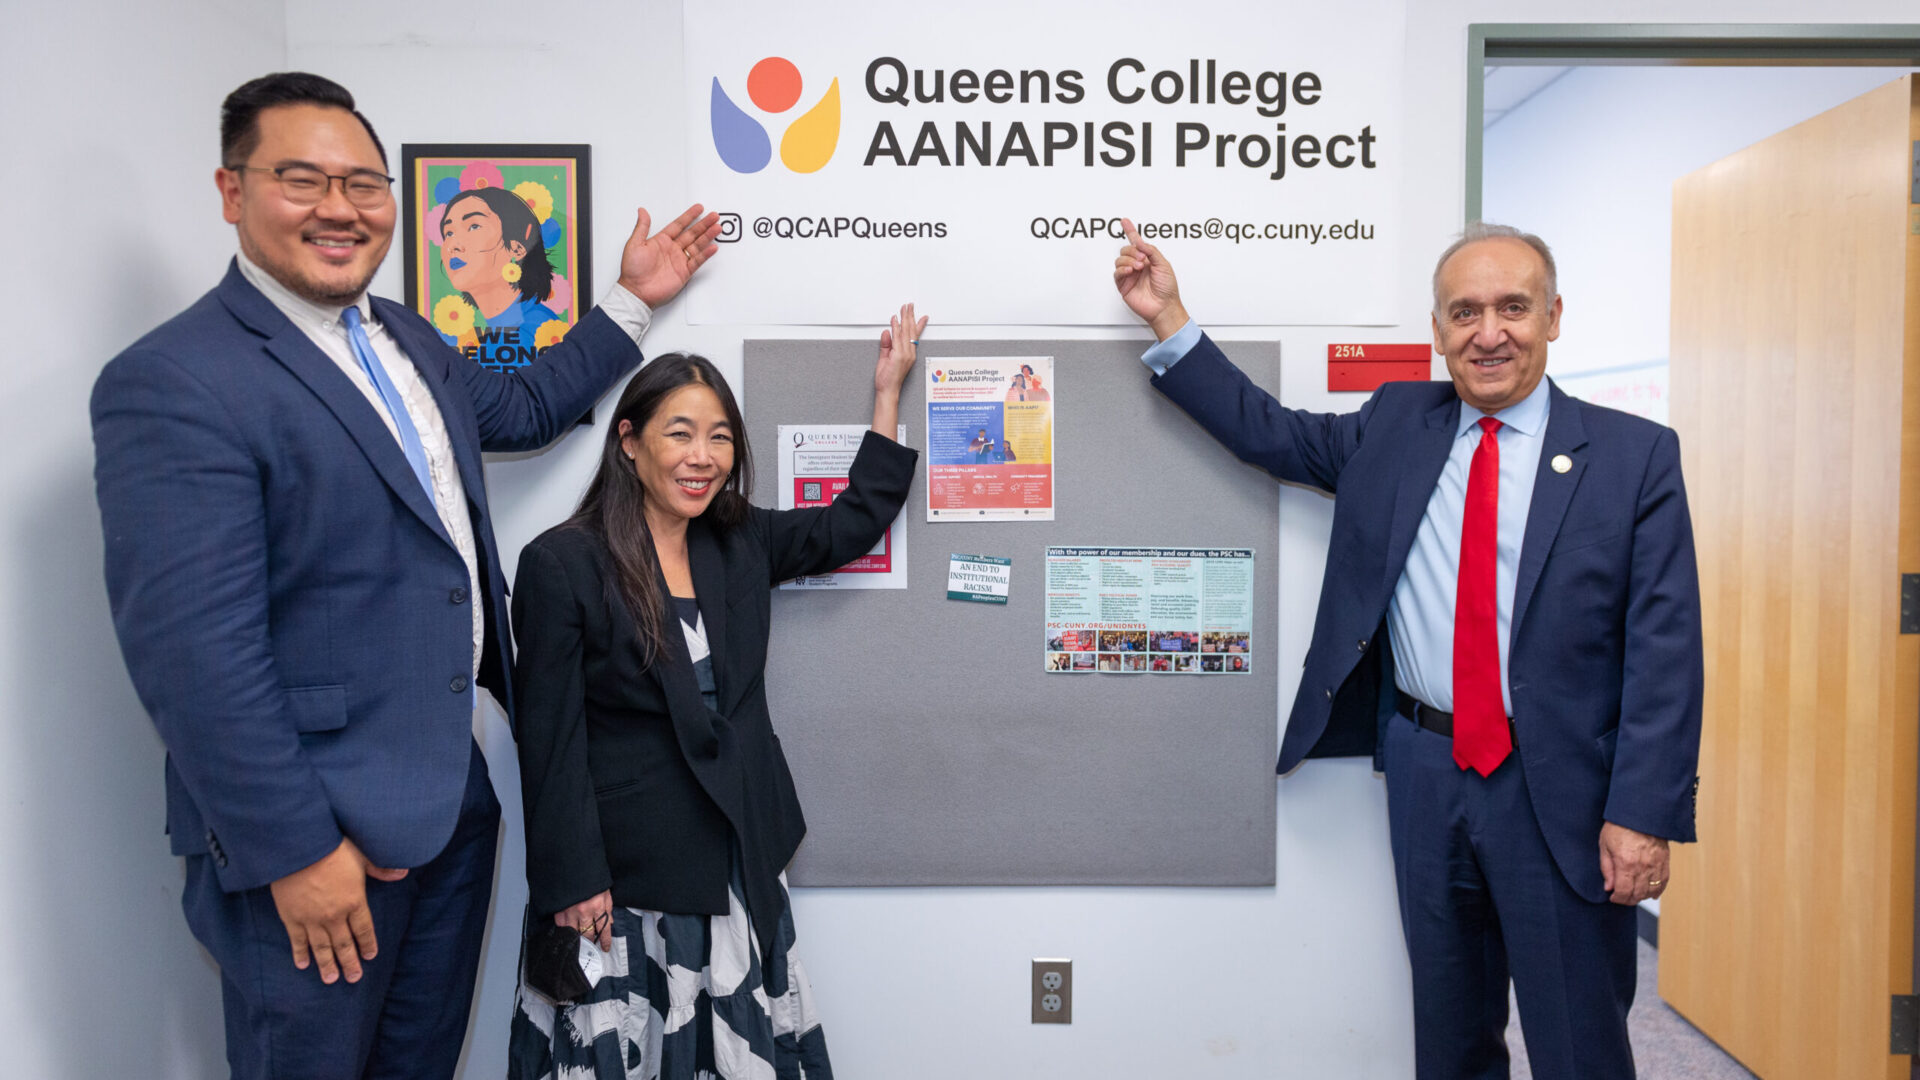 Dr. Paydar and other officials from the White House and USDOE pose in front of the QCAP sign at the student lounge area.